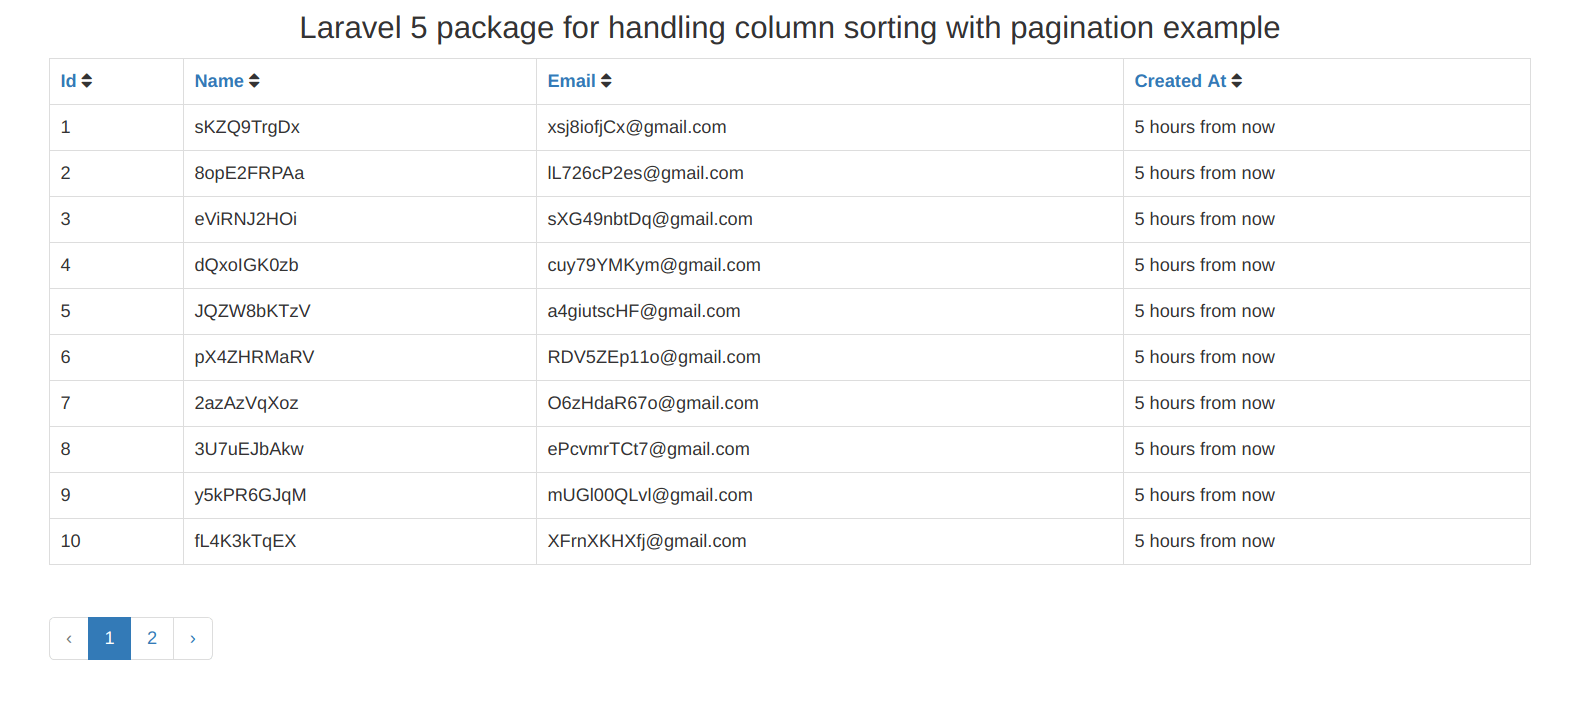 Laravel 5 package for handling column sorting with pagination example